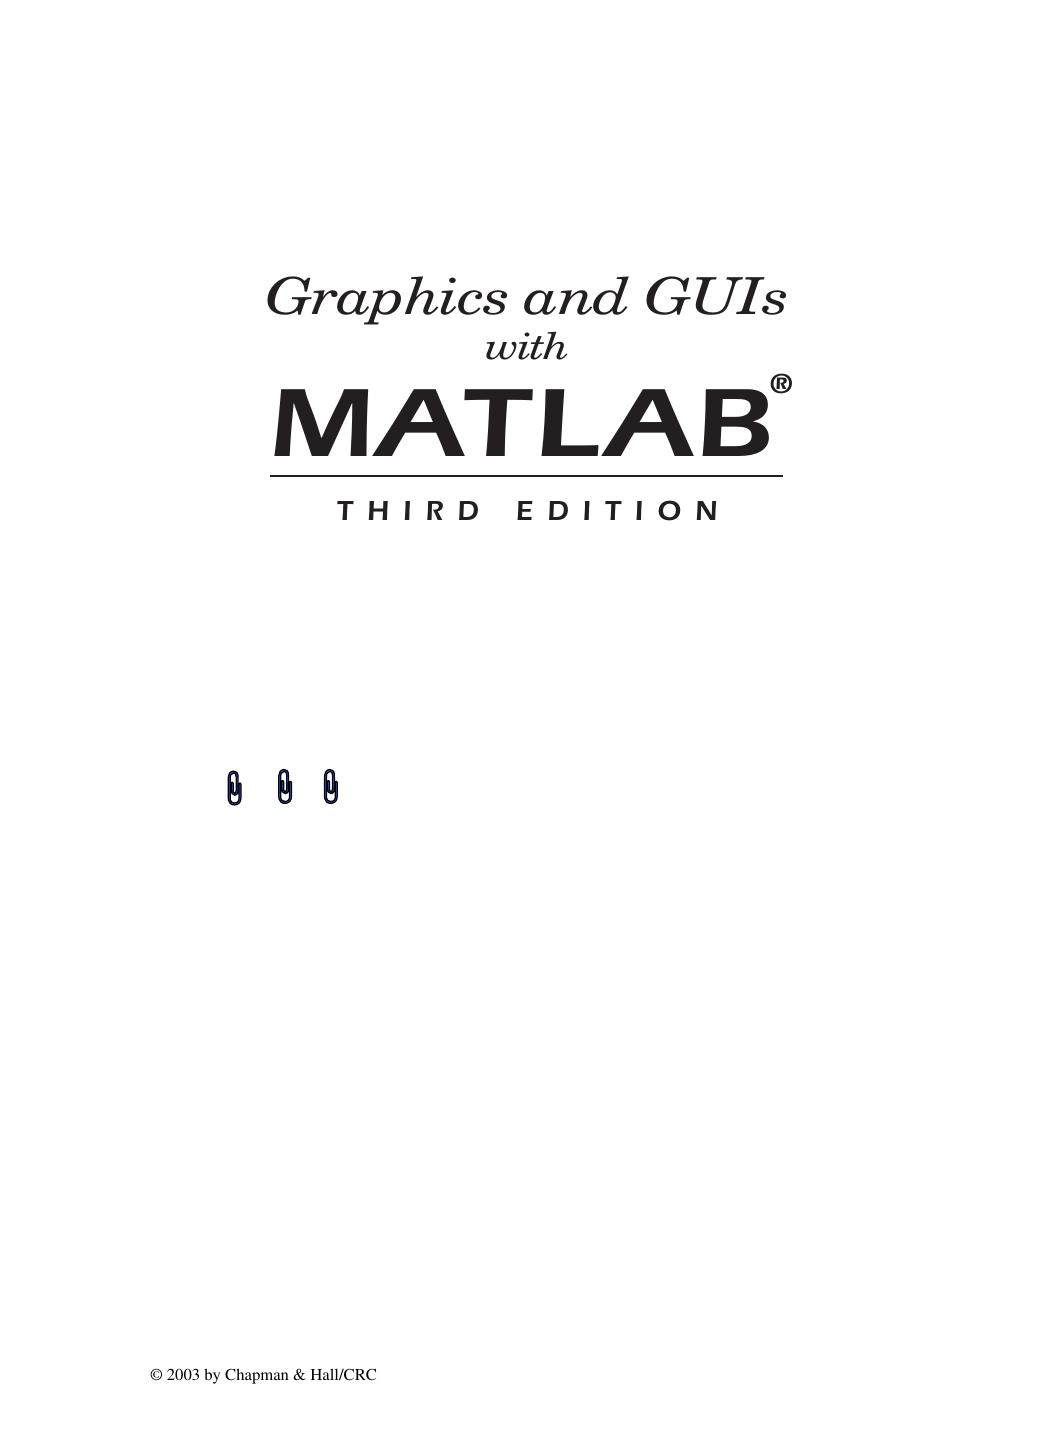 Graphics and GUIs with MATLAB, 3rd Ed - 2003